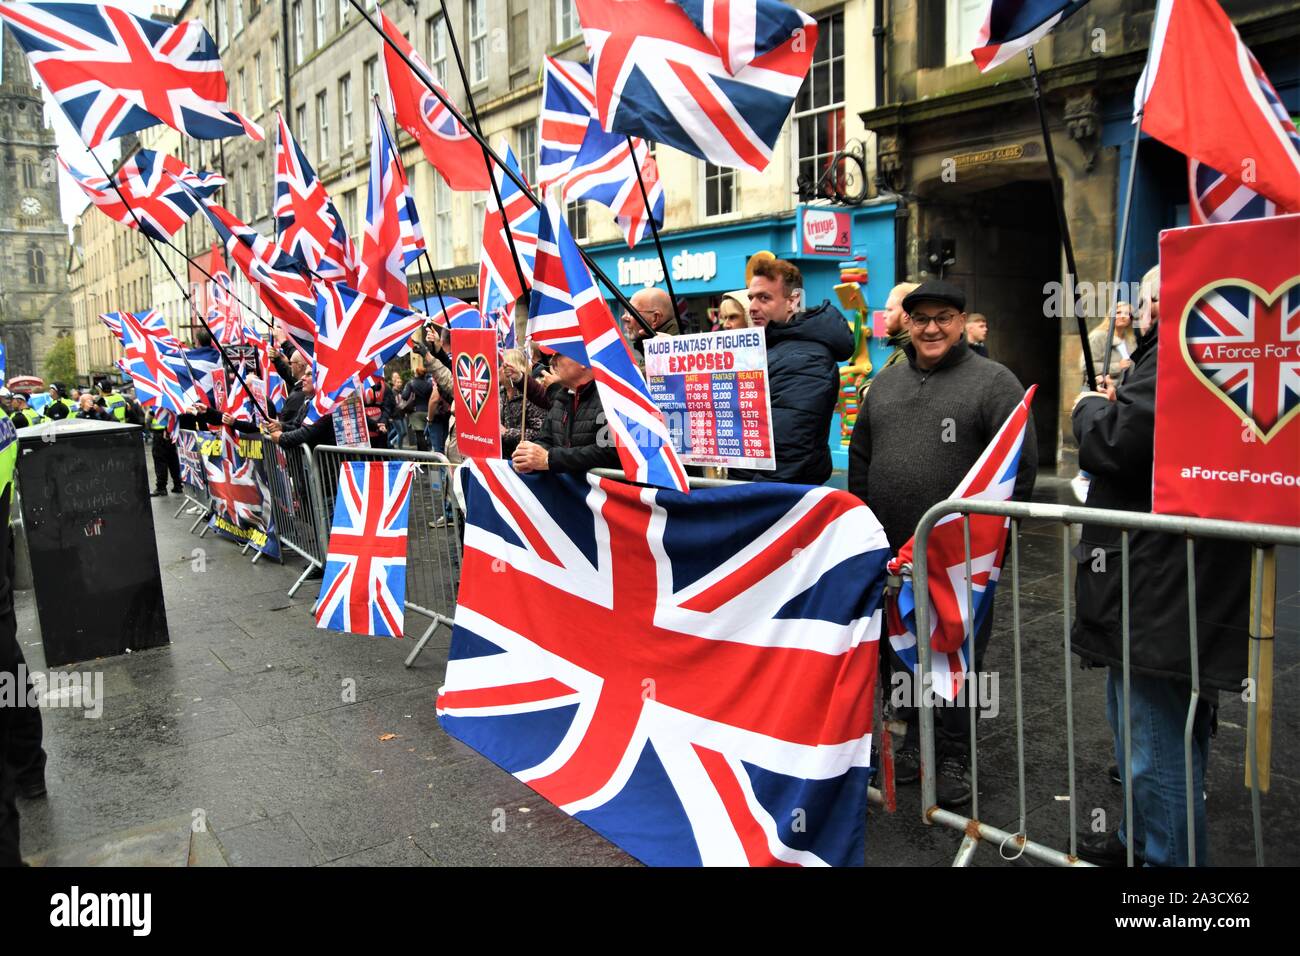 Alistair McConnachie and the AFFG Unionist support make their presence felt at the AUOB March of Independence 2019 Edinburgh. Stock Photo